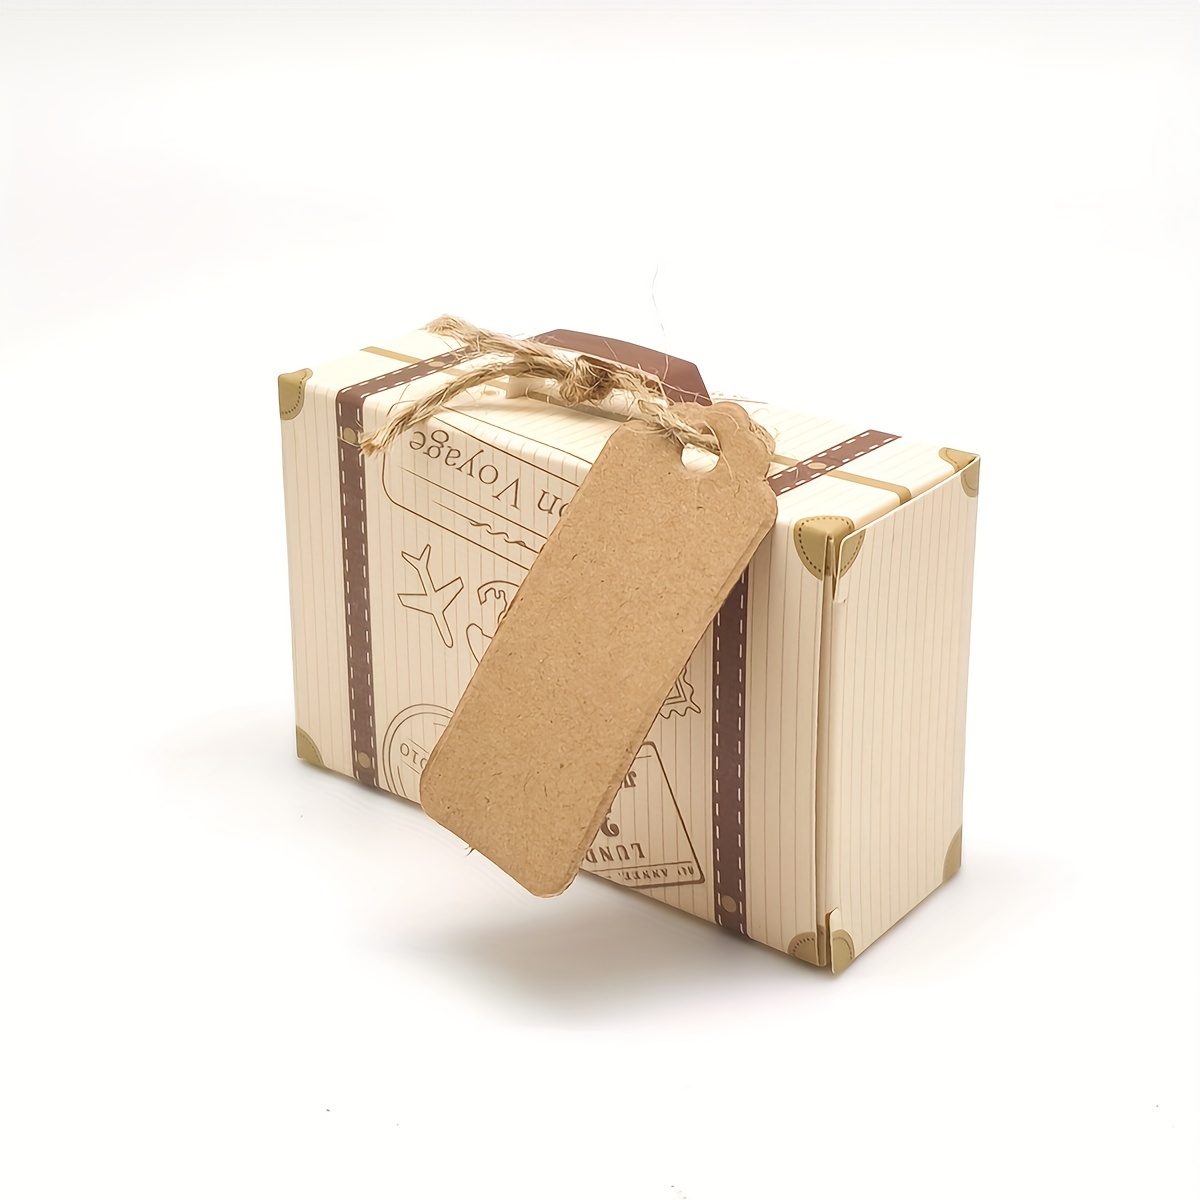 10/50pcs, Mini Travel Case Gift Packaging Box Candy Box With Hemp Rope Tag,  Cheapest Items Available, Small Business Supplies, Packaging Box, Wedding